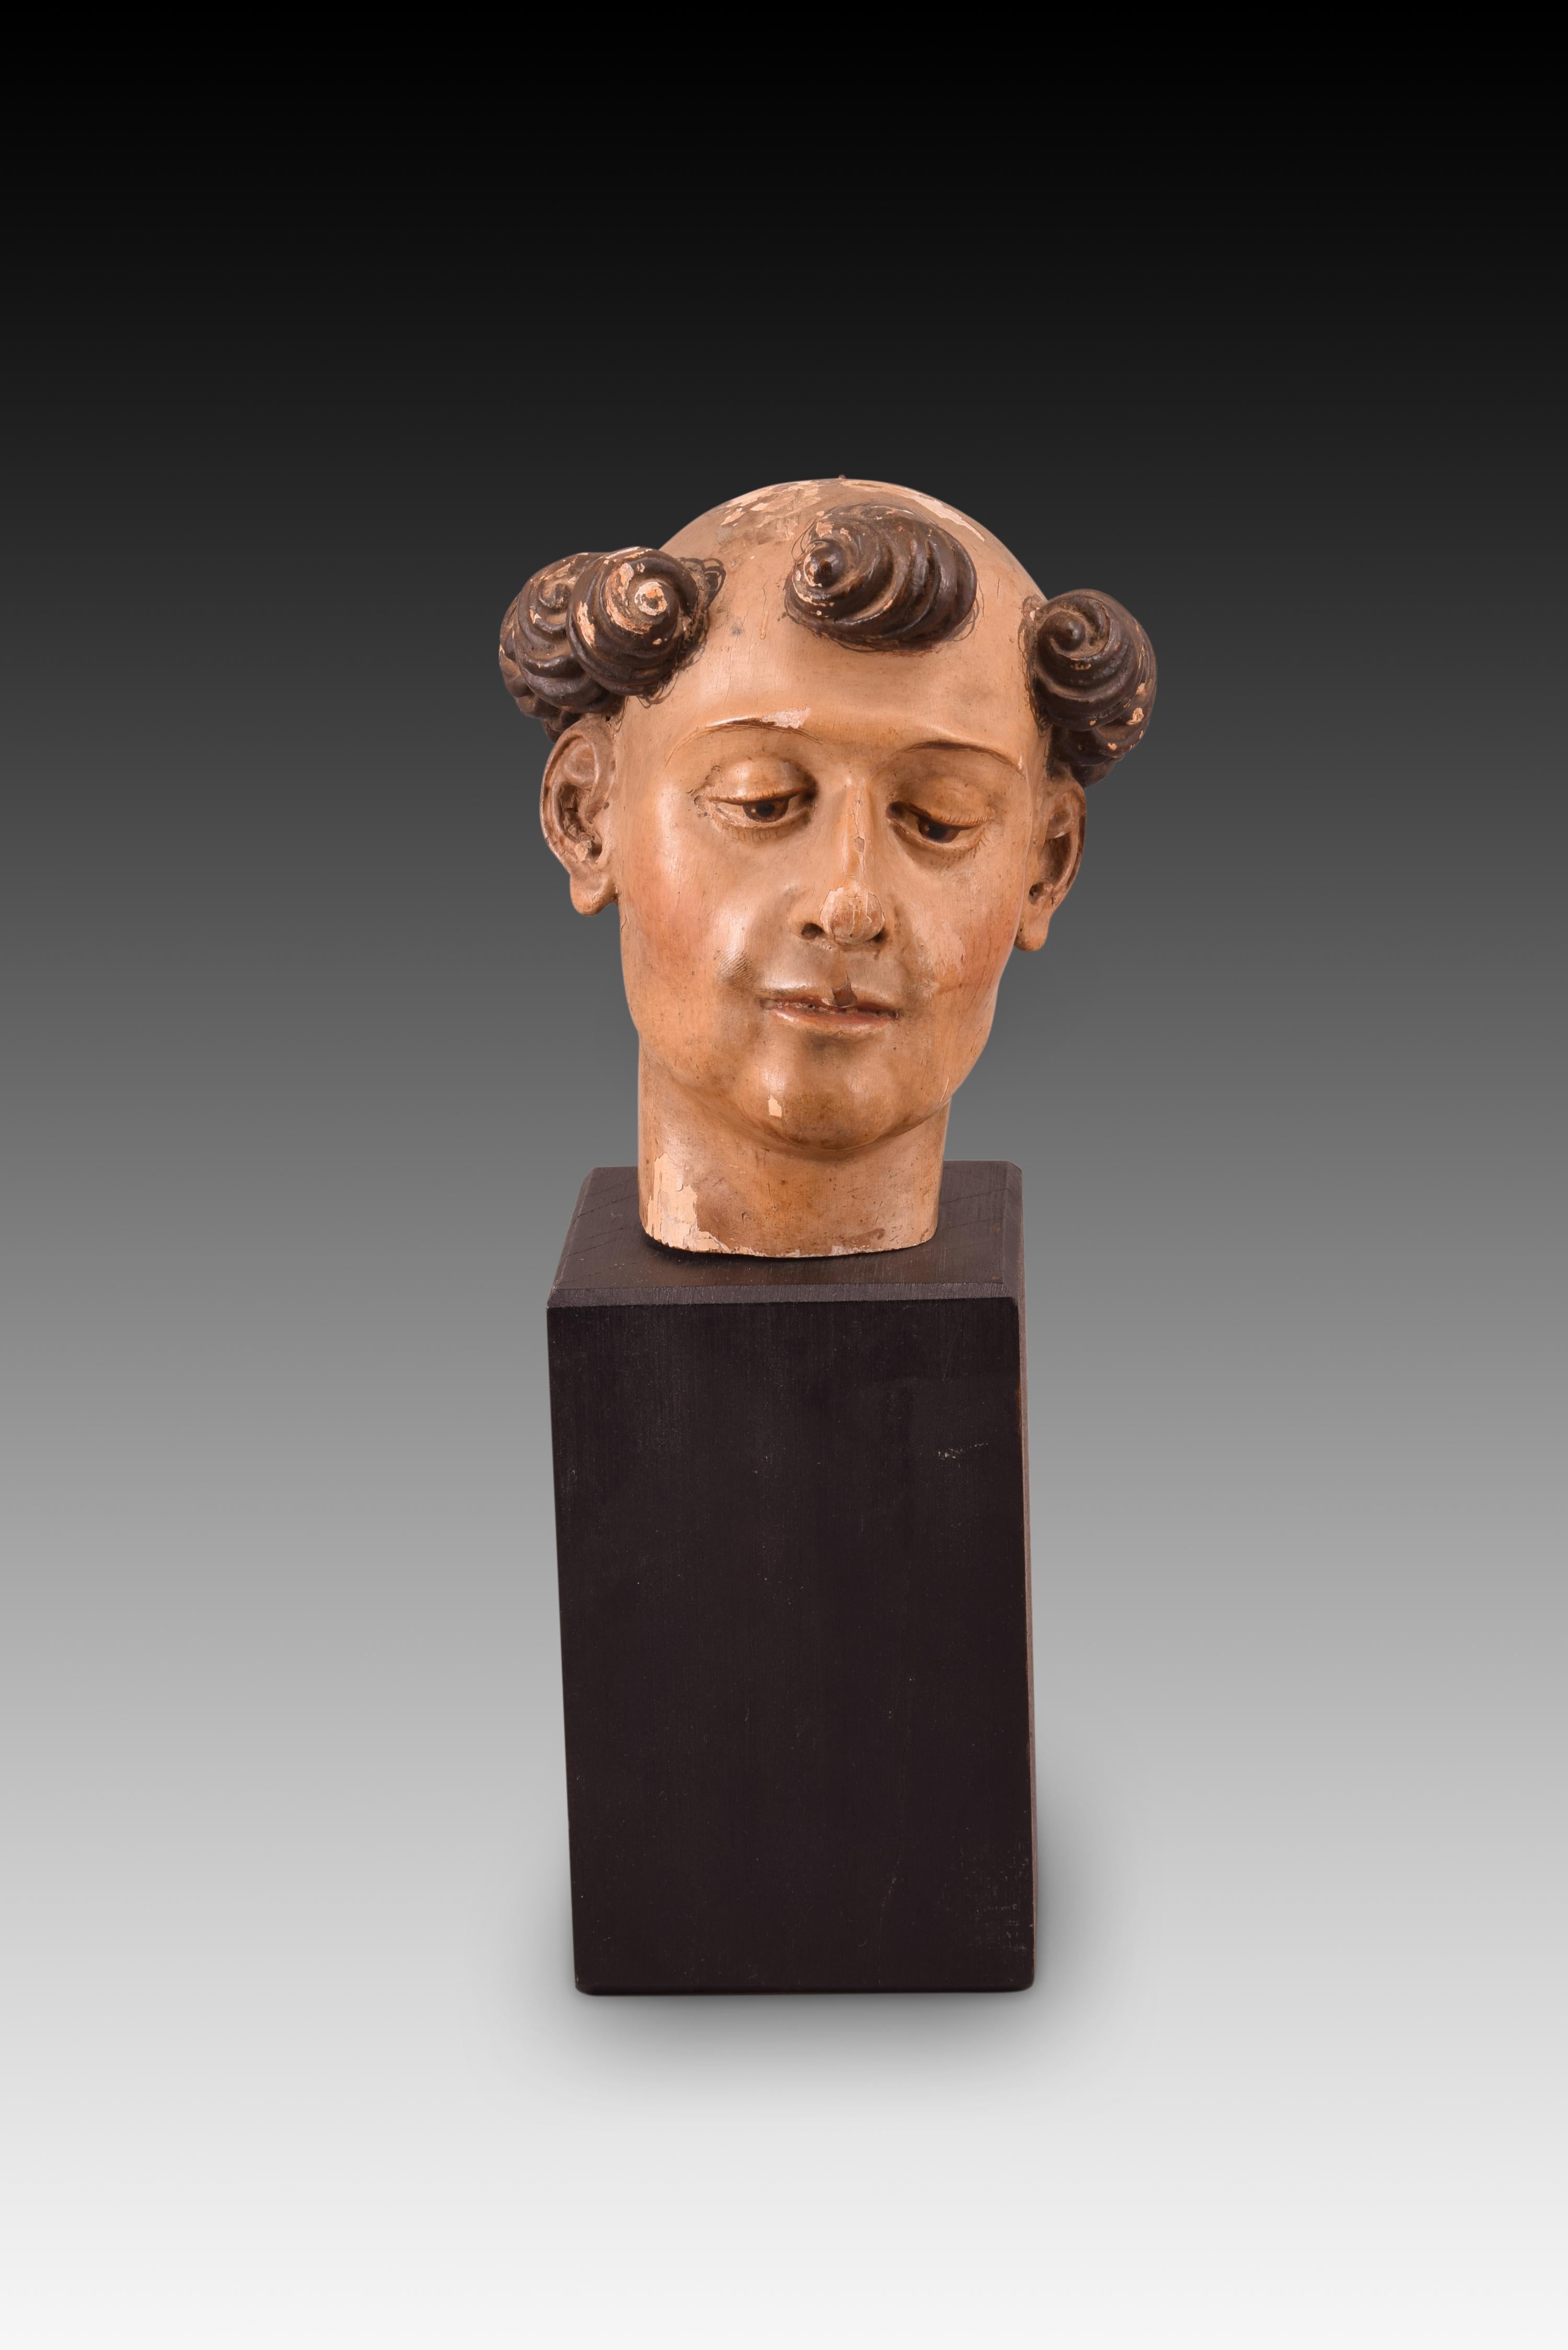 Saint head. Carved and polychrome wood. Spanish school, 17th century. 
Head made of carved and polychrome wood of a young man, with curly and tonsured dark hair, who keeps his gaze lowered. It does not have hairpieces, but follows the usual lines